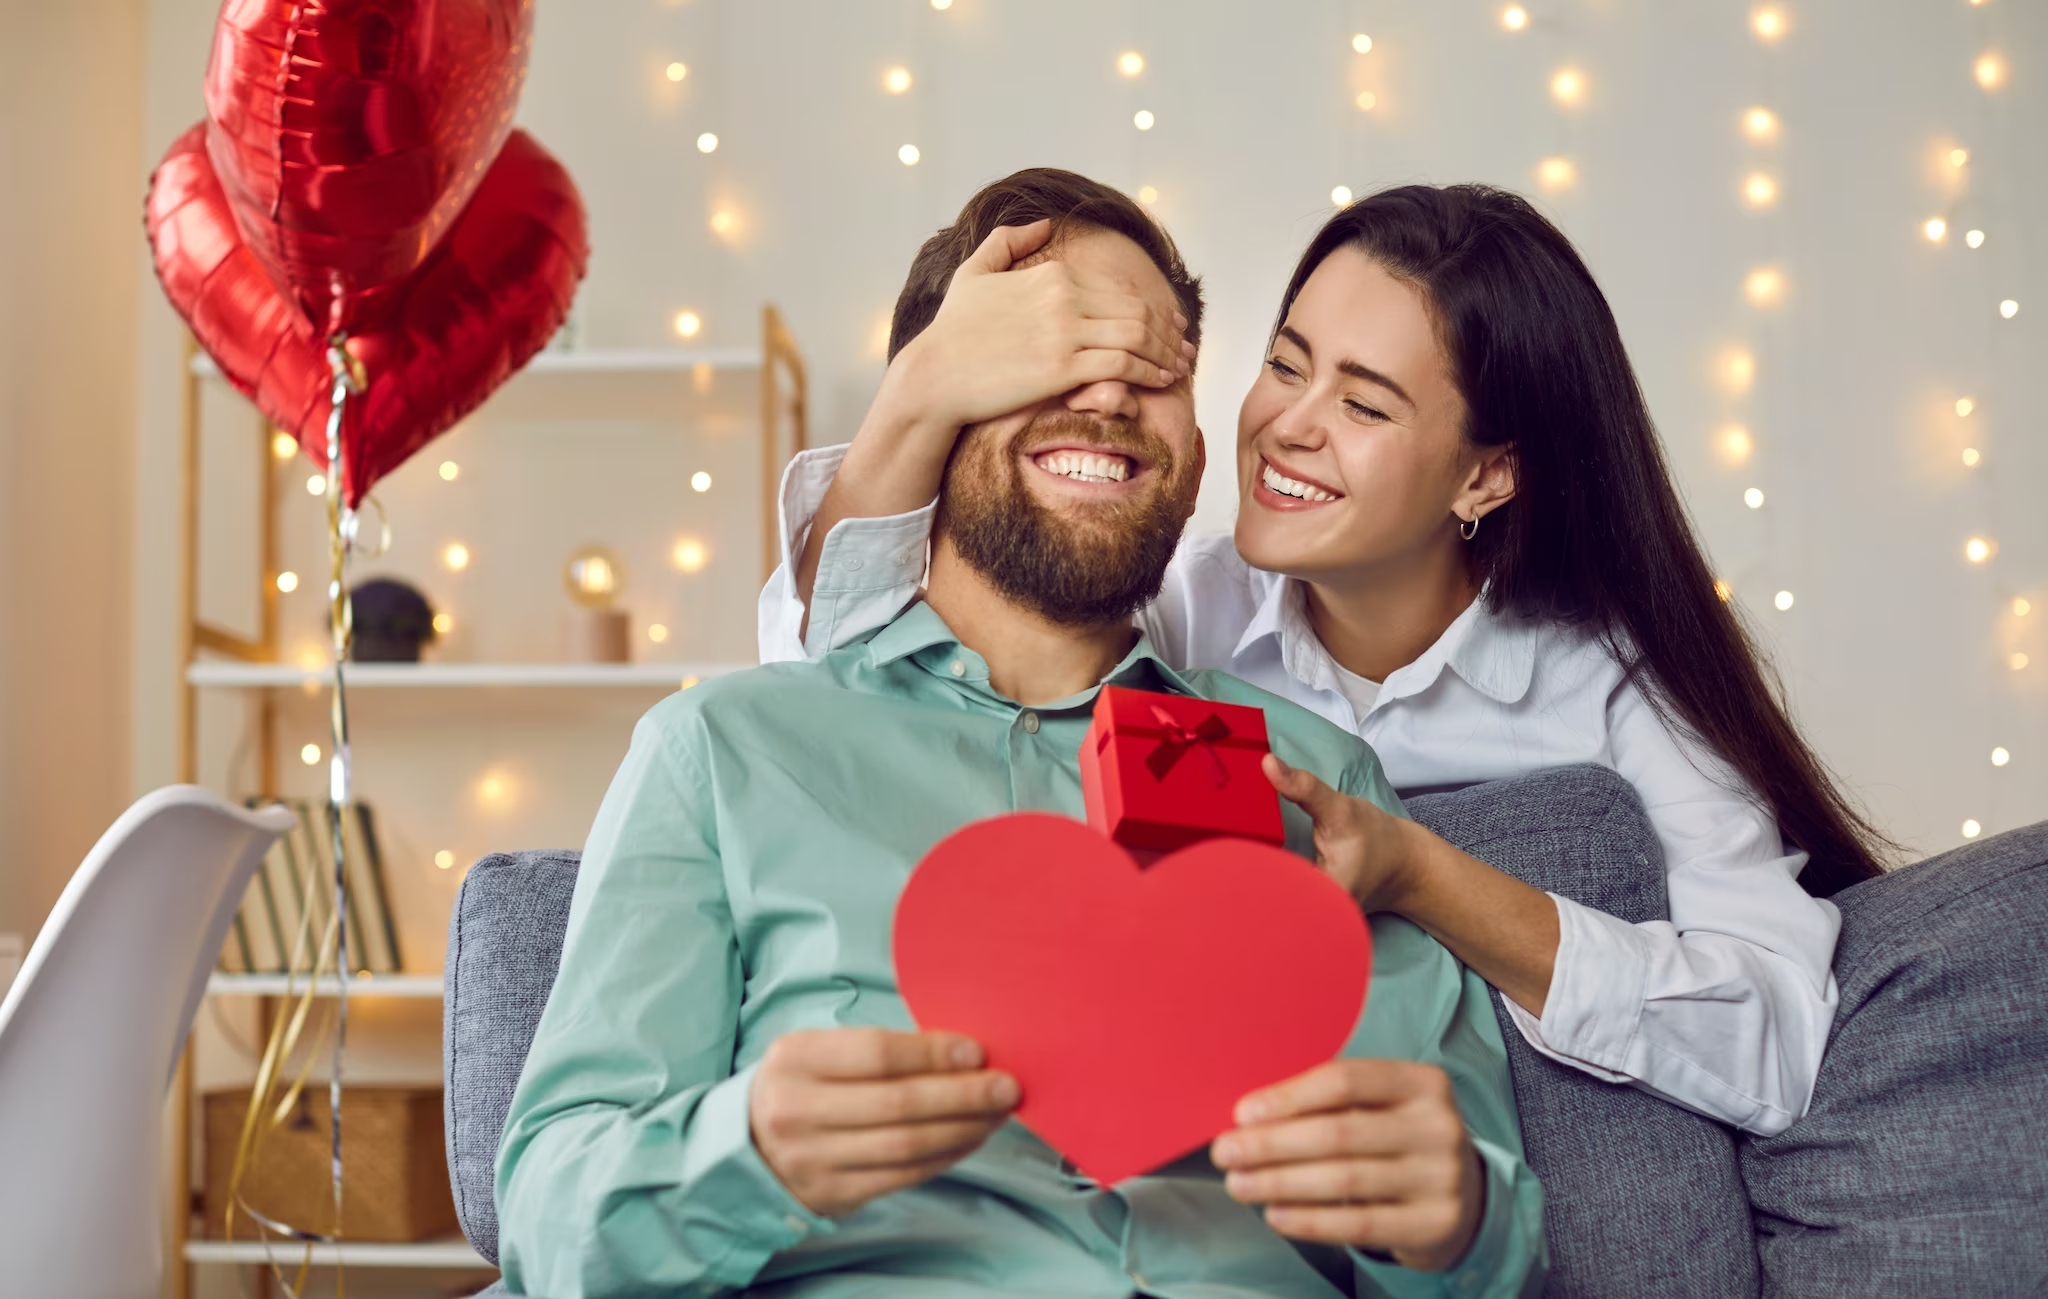 Love: The Heart of Valentine's Day Celebrations